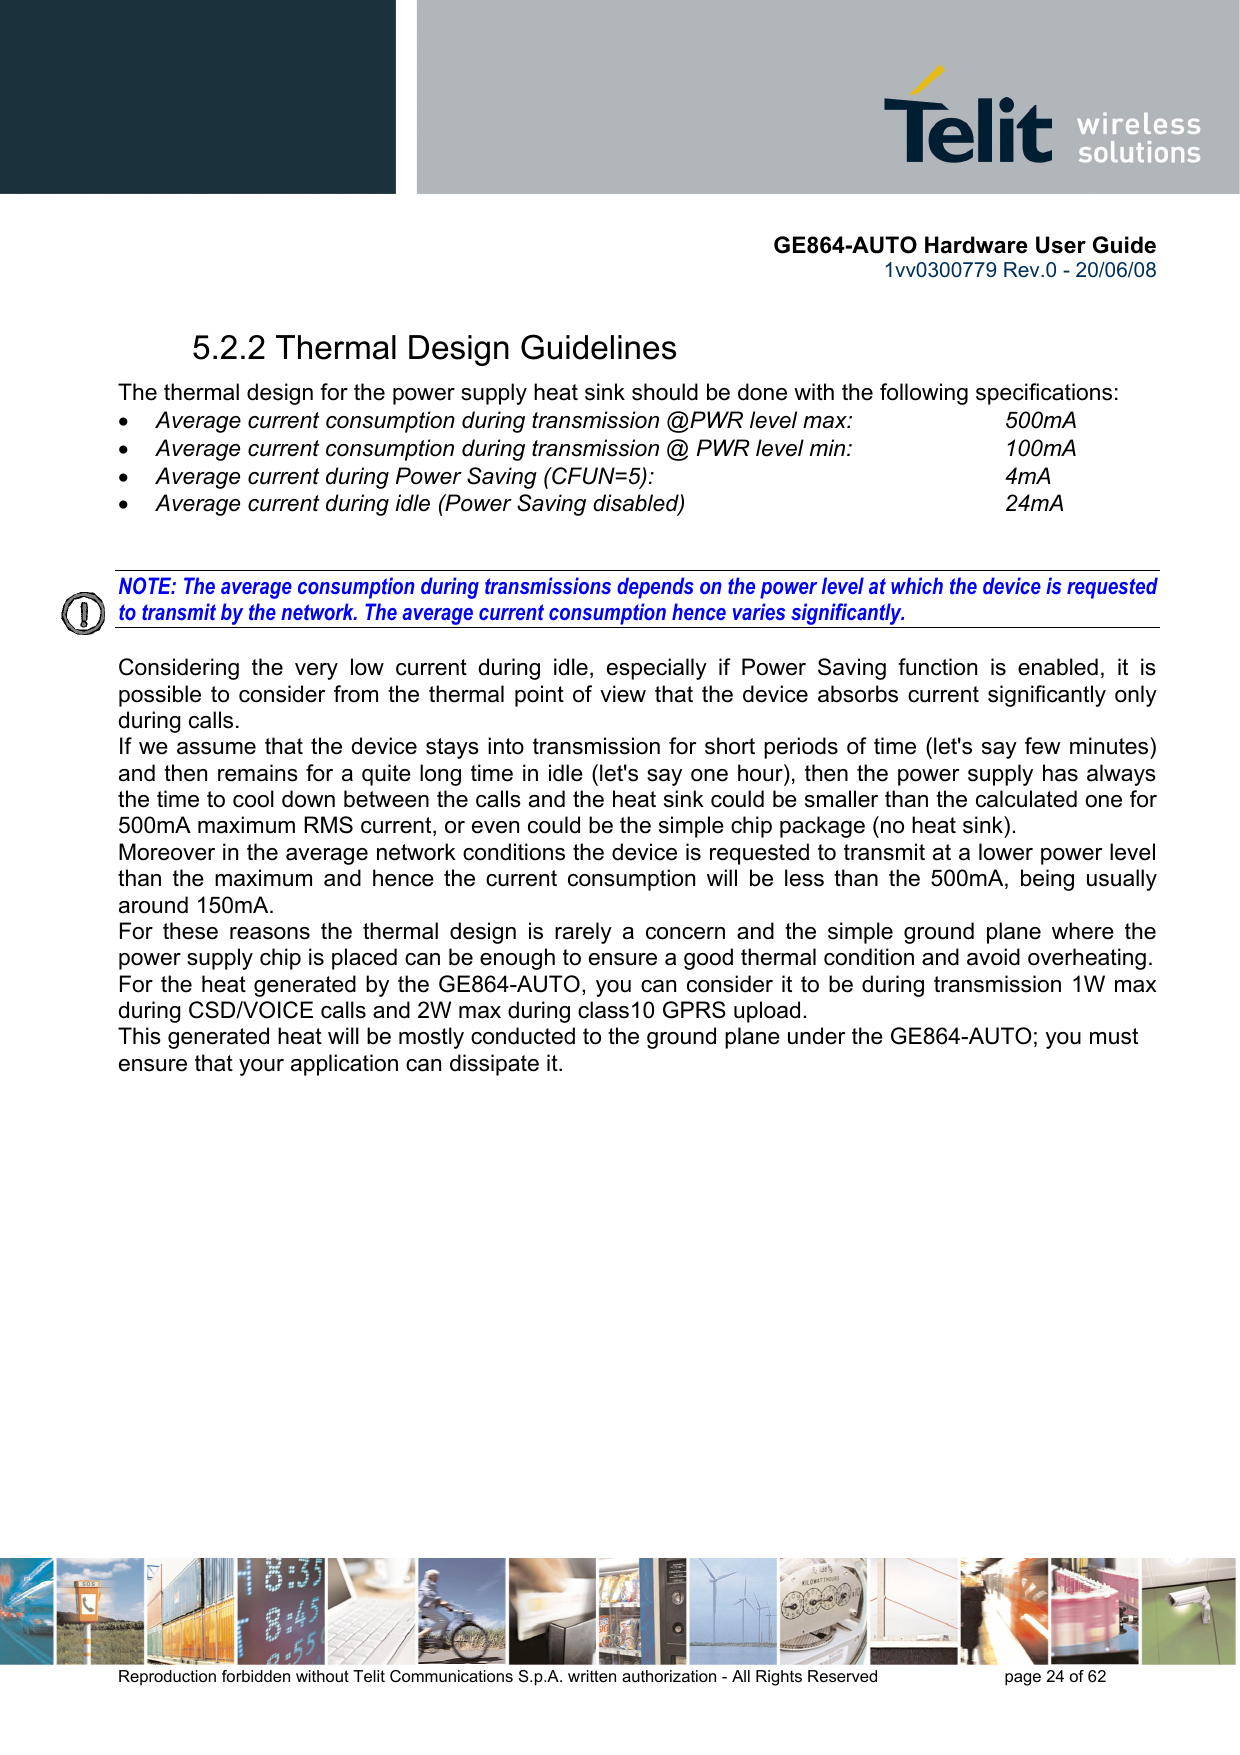       GE864-AUTO Hardware User Guide 1vv0300779 Rev.0 - 20/06/08      Reproduction forbidden without Telit Communications S.p.A. written authorization - All Rights Reserved    page 24 of 62  5.2.2 Thermal Design Guidelines The thermal design for the power supply heat sink should be done with the following specifications: • Average current consumption during transmission @PWR level max:    500mA • Average current consumption during transmission @ PWR level min:    100mA  • Average current during Power Saving (CFUN=5):         4mA • Average current during idle (Power Saving disabled)        24mA   NOTE: The average consumption during transmissions depends on the power level at which the device is requested to transmit by the network. The average current consumption hence varies significantly.  Considering the very low current during idle, especially if Power Saving function is enabled, it is possible to consider from the thermal point of view that the device absorbs current significantly only during calls.  If we assume that the device stays into transmission for short periods of time (let&apos;s say few minutes) and then remains for a quite long time in idle (let&apos;s say one hour), then the power supply has always the time to cool down between the calls and the heat sink could be smaller than the calculated one for 500mA maximum RMS current, or even could be the simple chip package (no heat sink). Moreover in the average network conditions the device is requested to transmit at a lower power level than the maximum and hence the current consumption will be less than the 500mA, being usually around 150mA. For these reasons the thermal design is rarely a concern and the simple ground plane where the power supply chip is placed can be enough to ensure a good thermal condition and avoid overheating.  For the heat generated by the GE864-AUTO, you can consider it to be during transmission 1W max during CSD/VOICE calls and 2W max during class10 GPRS upload.  This generated heat will be mostly conducted to the ground plane under the GE864-AUTO; you must ensure that your application can dissipate it.  